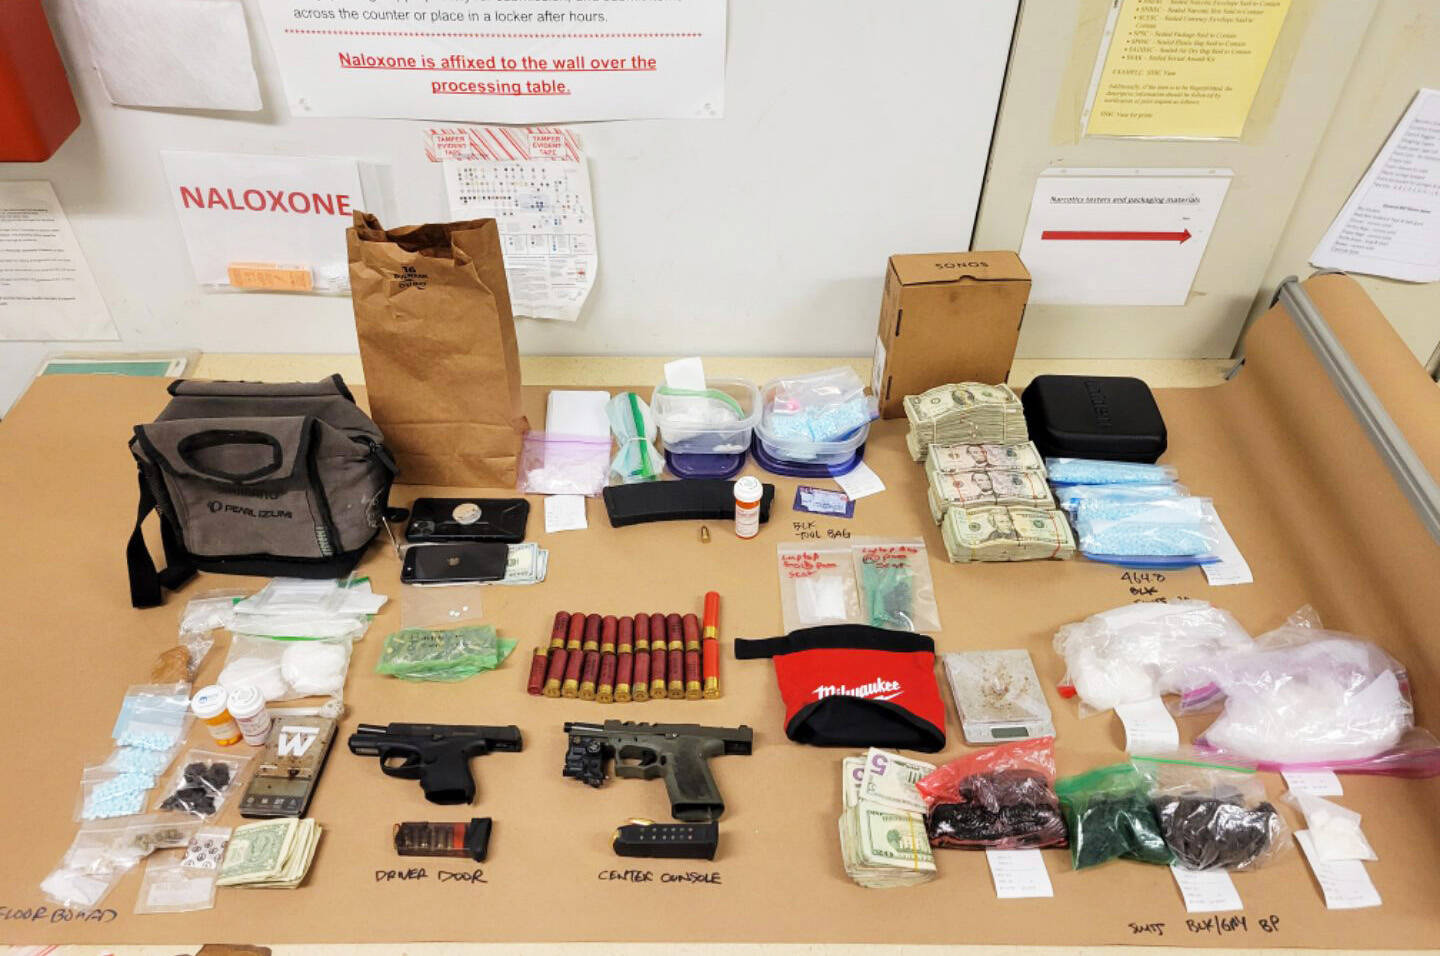 Seattle Police reportedly found a large quantity of drugs, two guns and $20,000 cash inside the vehicle of a man arrested March 29 in downtown Kent. COURTESY PHOTO, Seattle Police